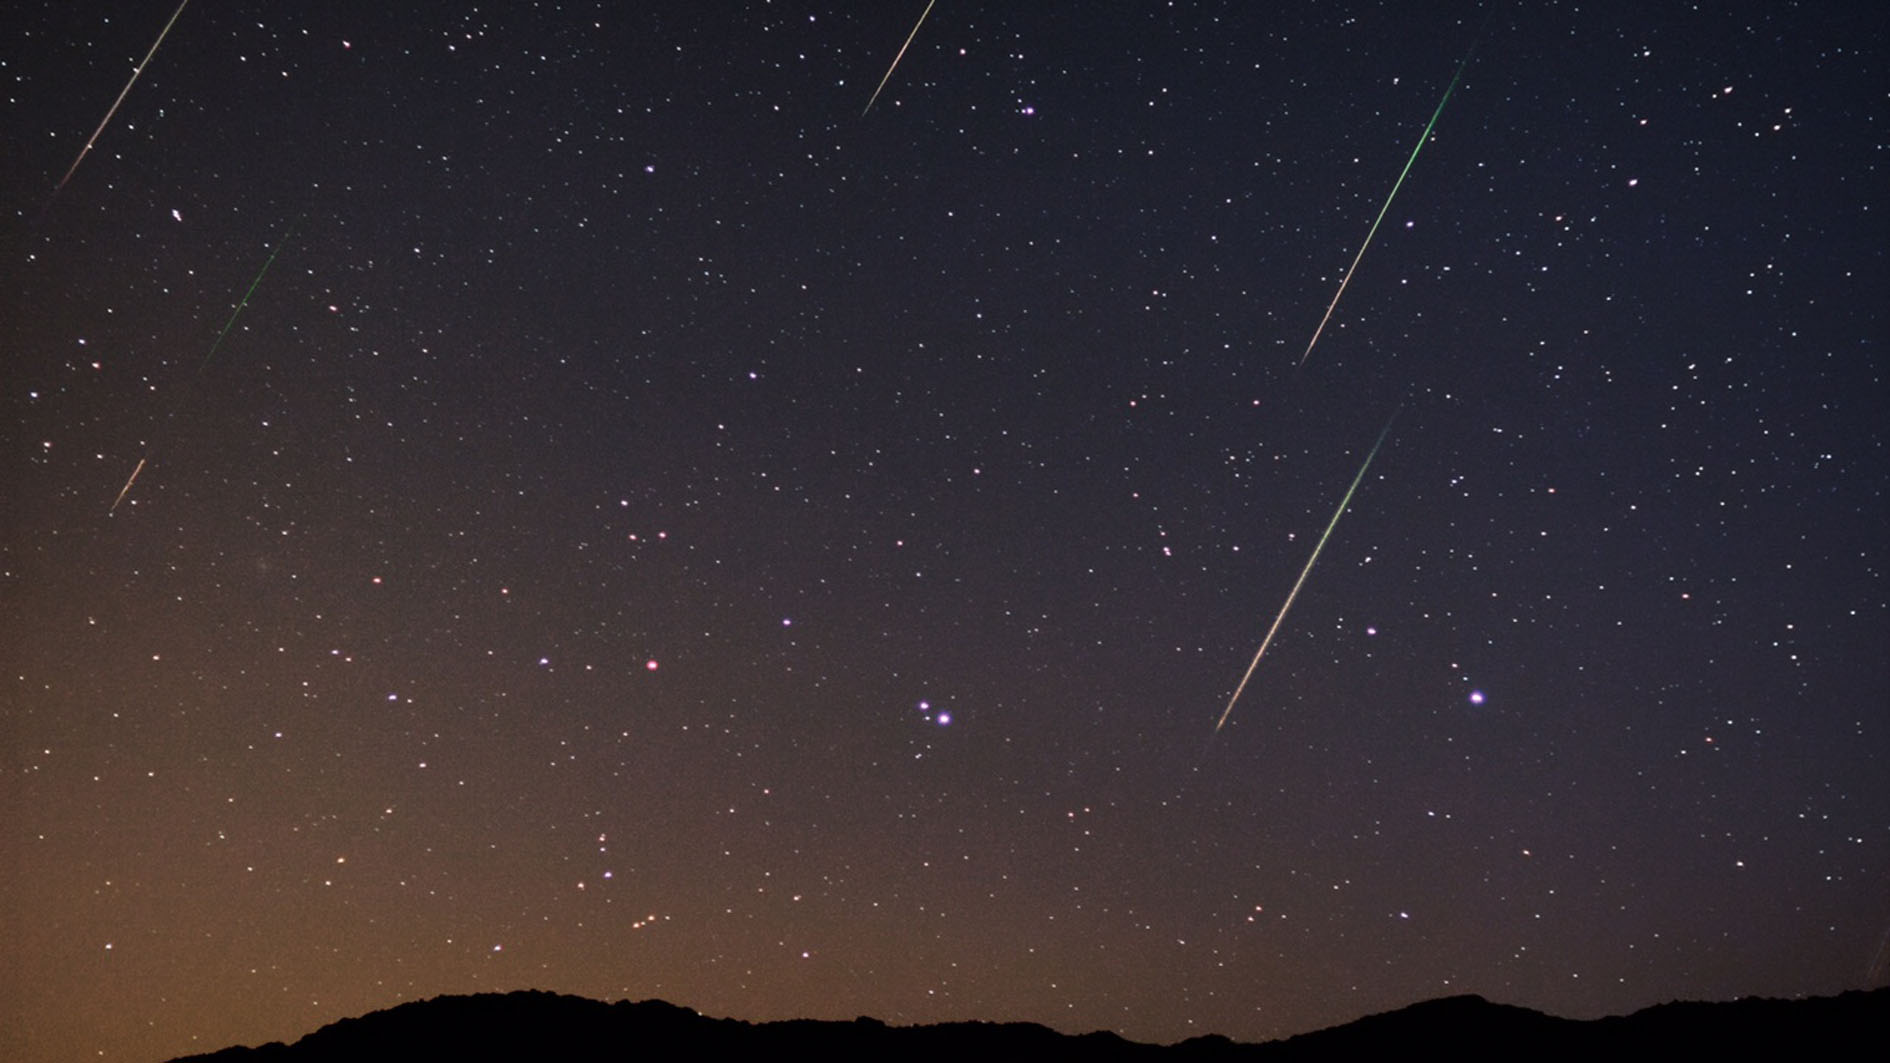 Successfully observing the Perseids: here’s how to do it